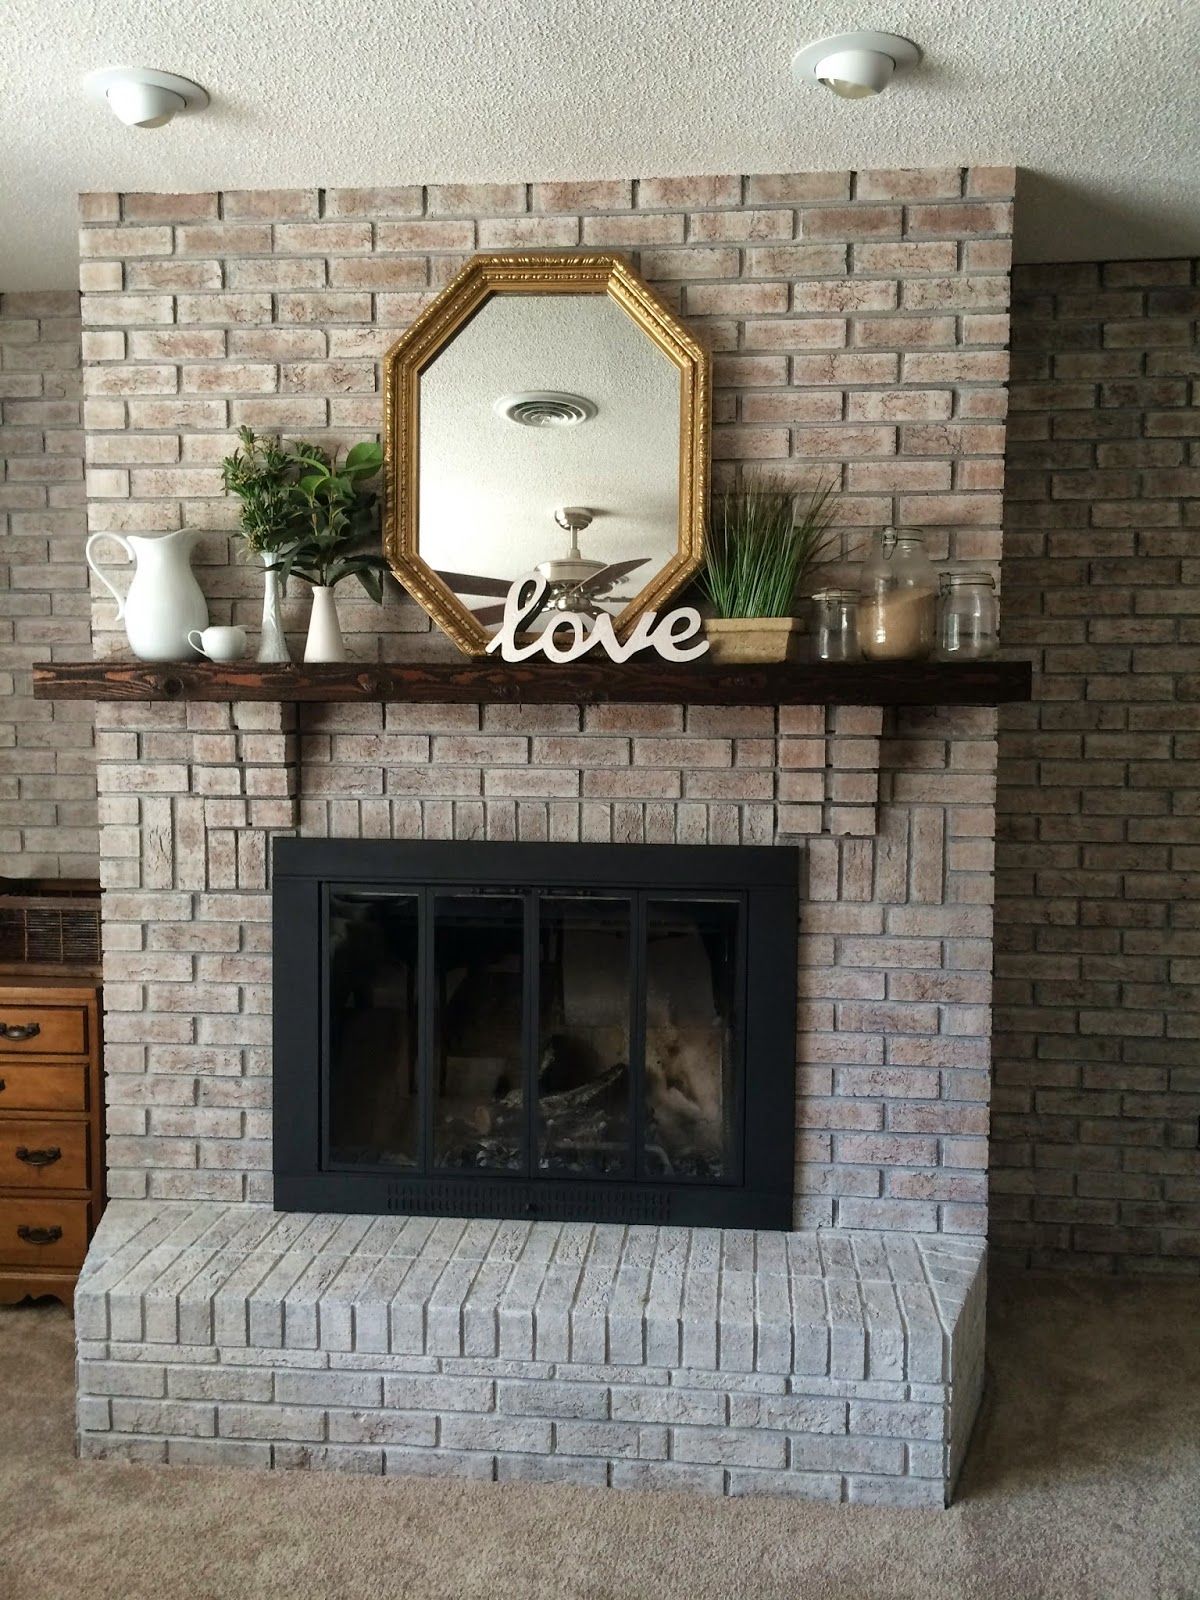 Different Types Of Fireplaces Fresh White Washing Brick with Gray Beige Walking with Dancers